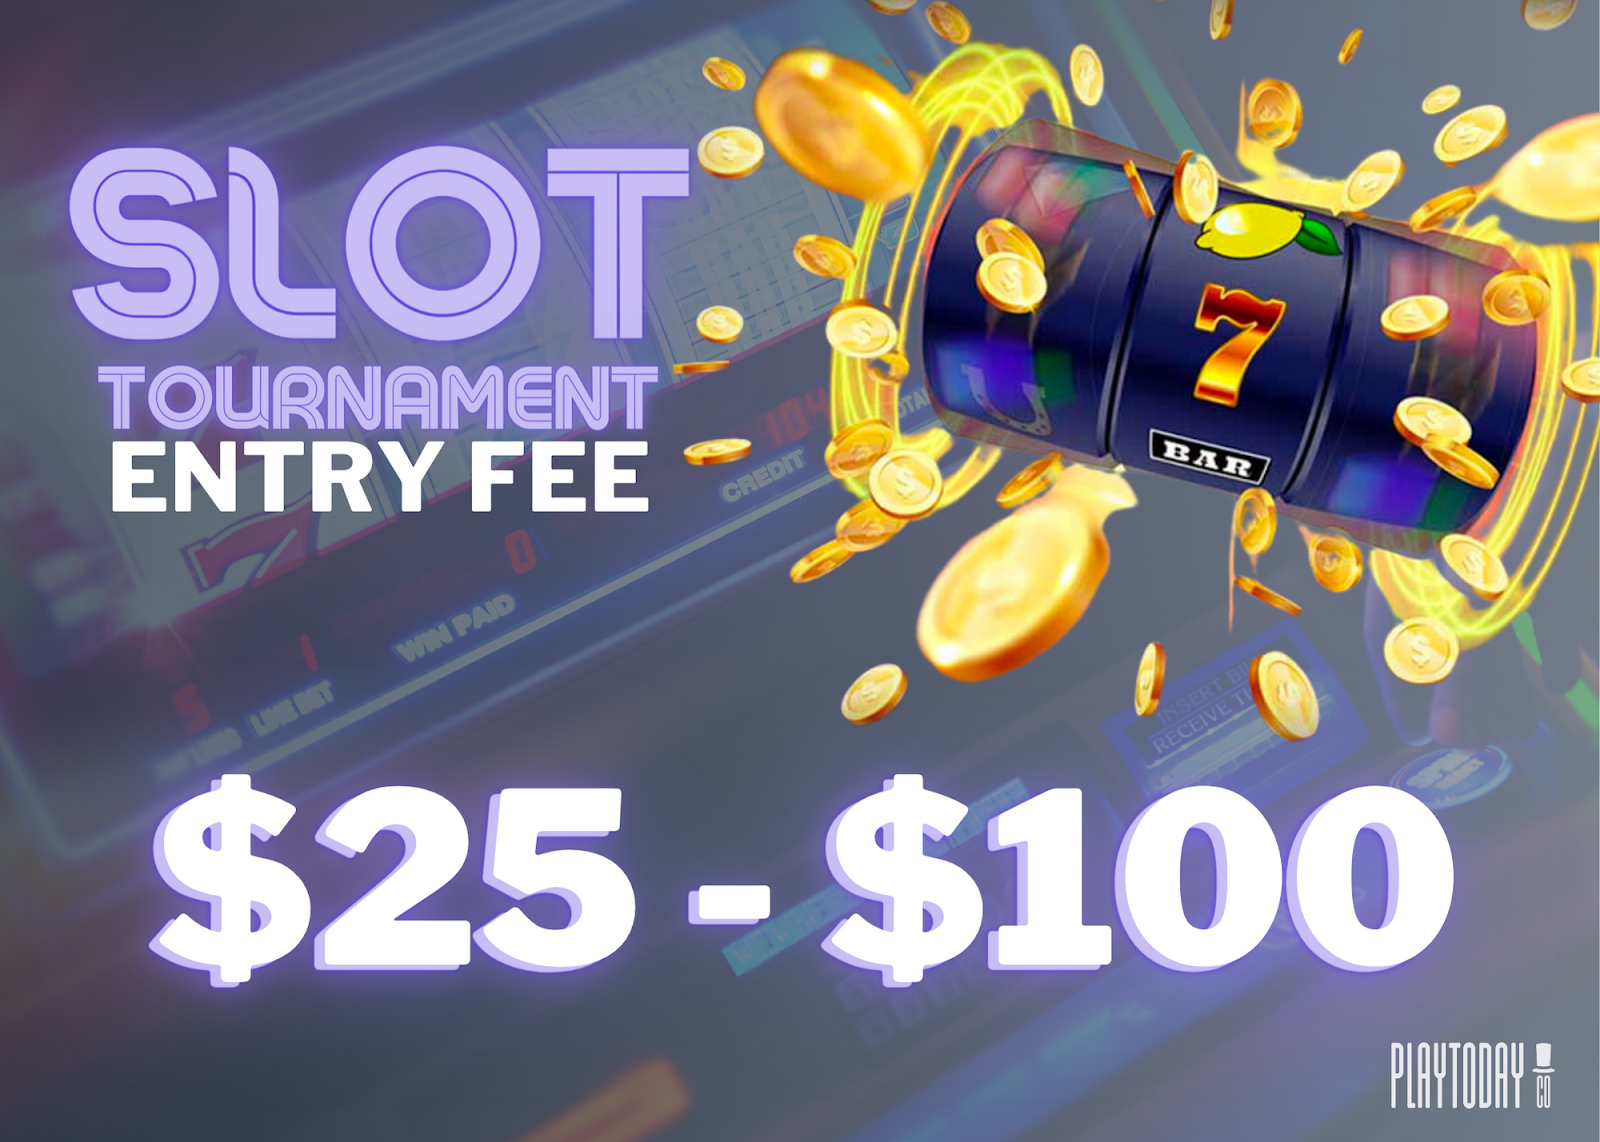 Infographic about slot tournament entry fee